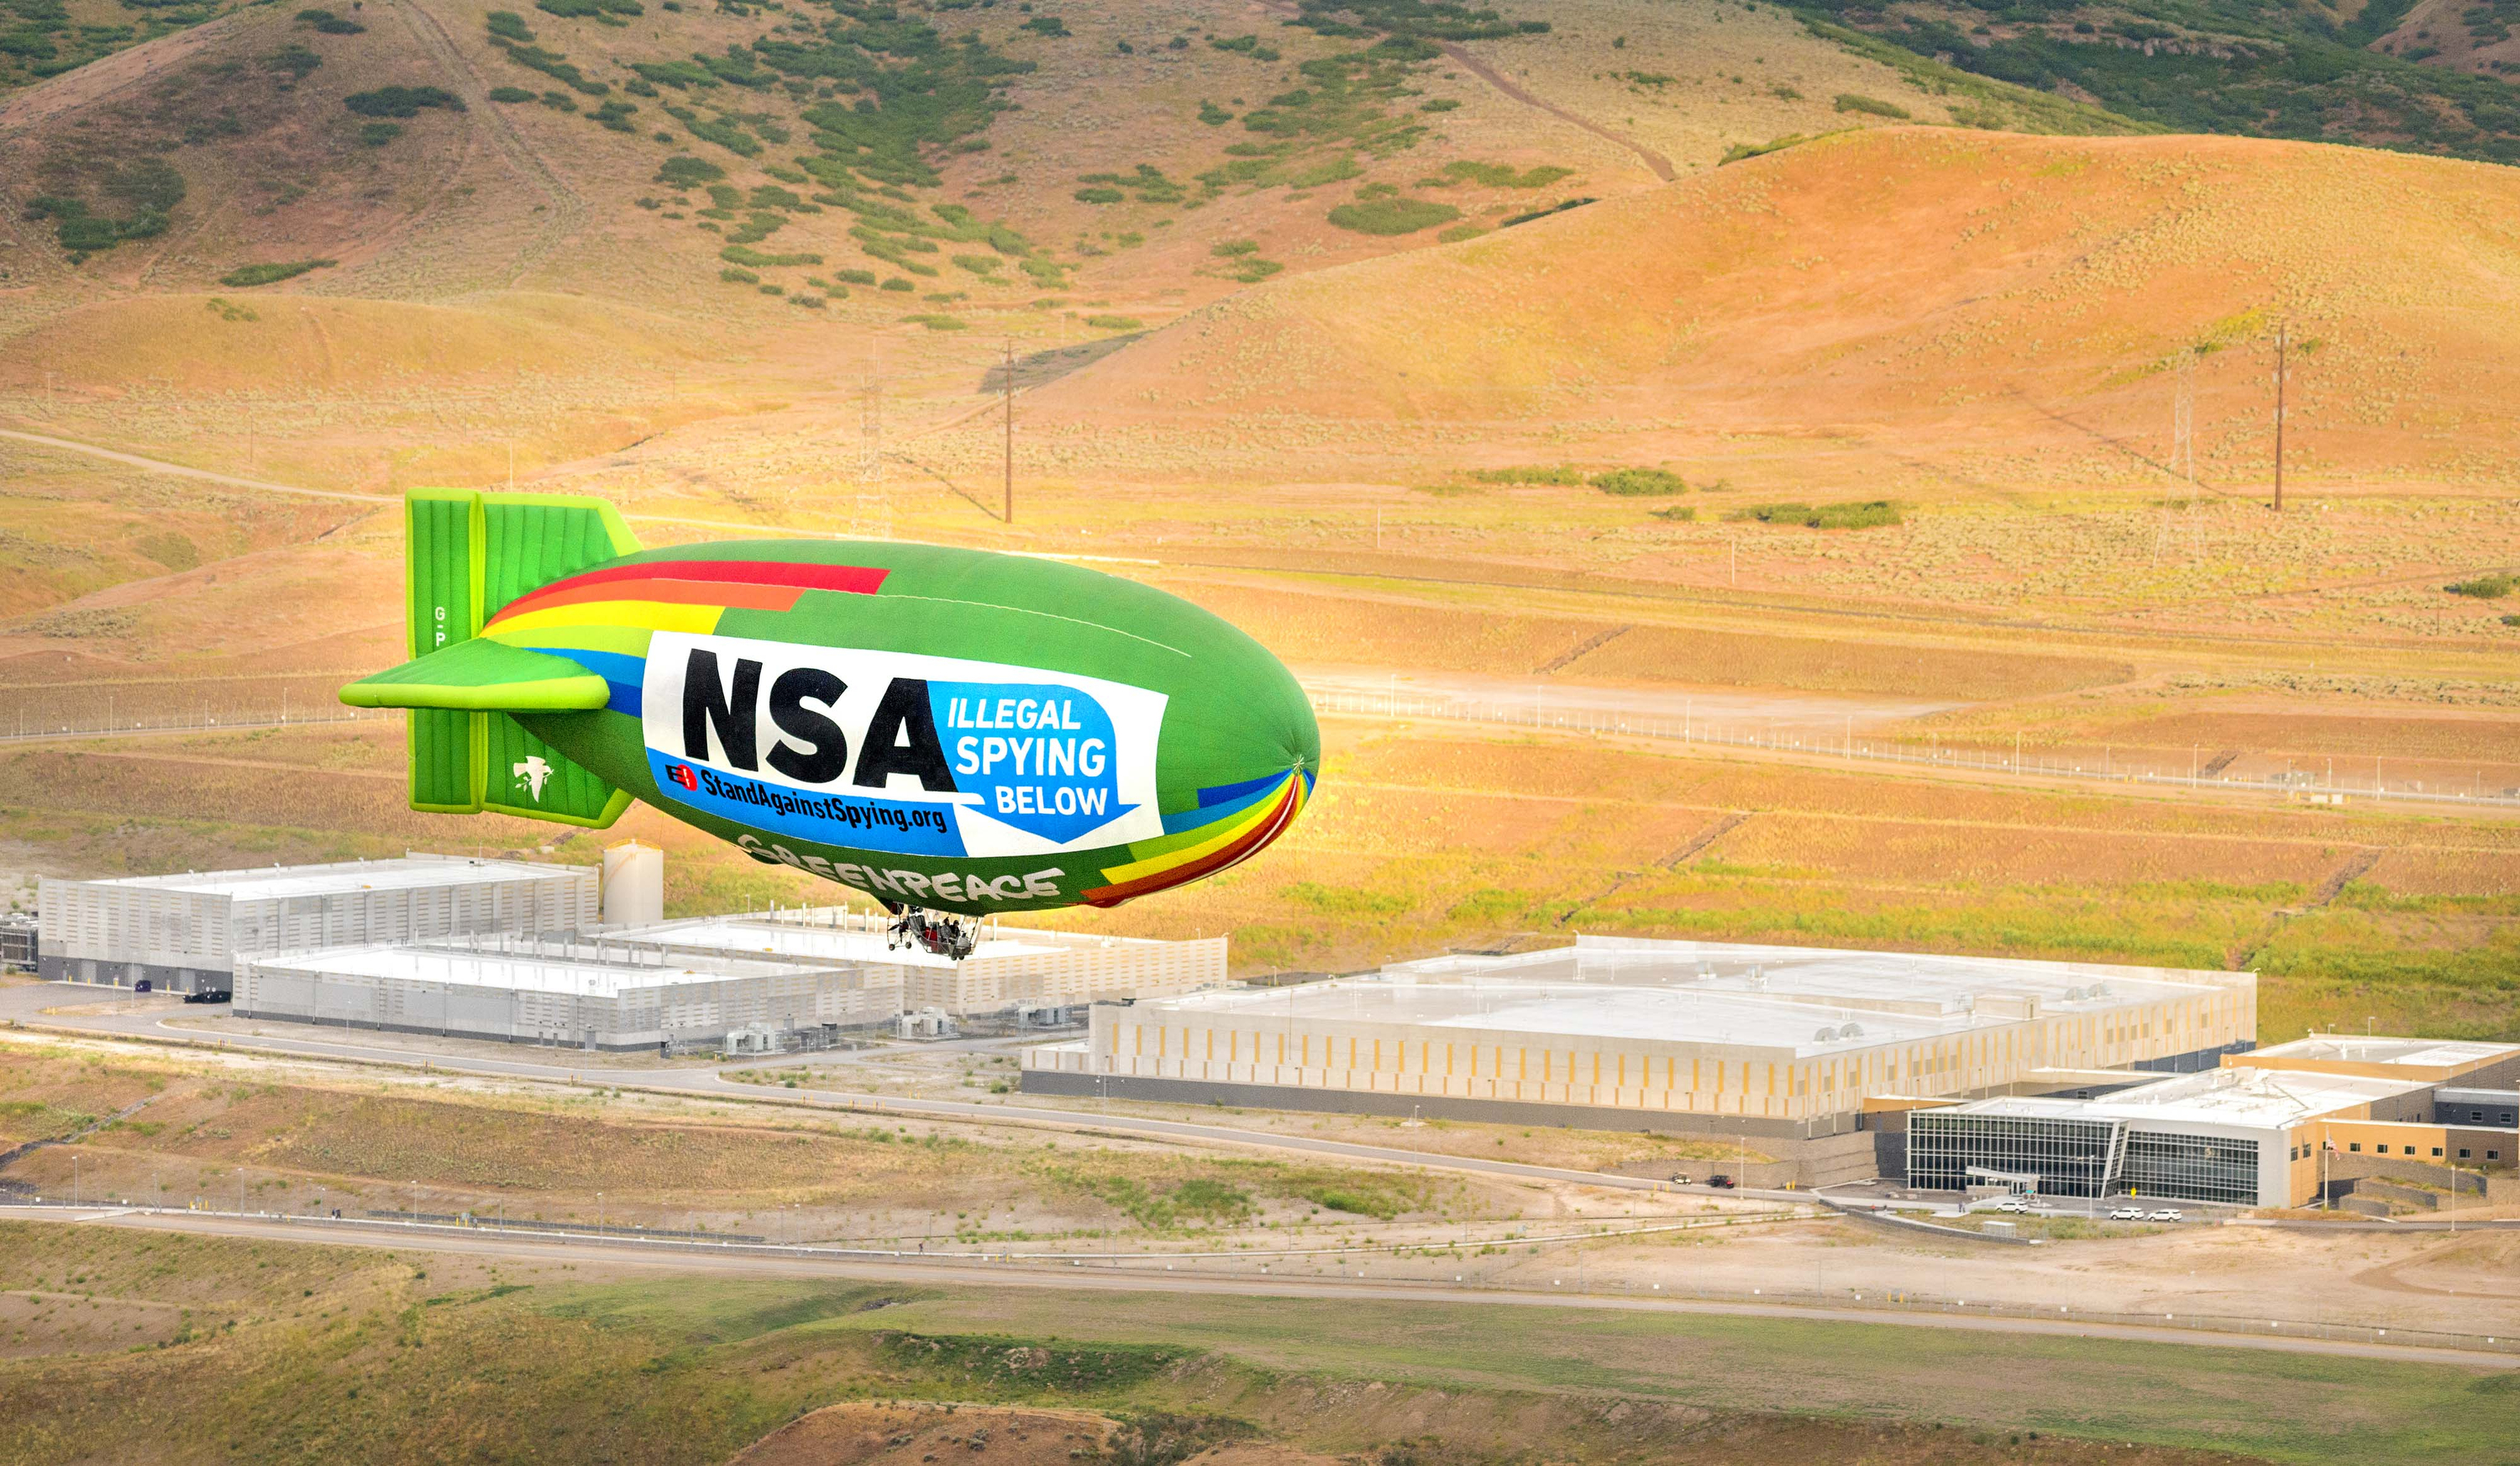 Blimp Protests Illegal NSA Spying.